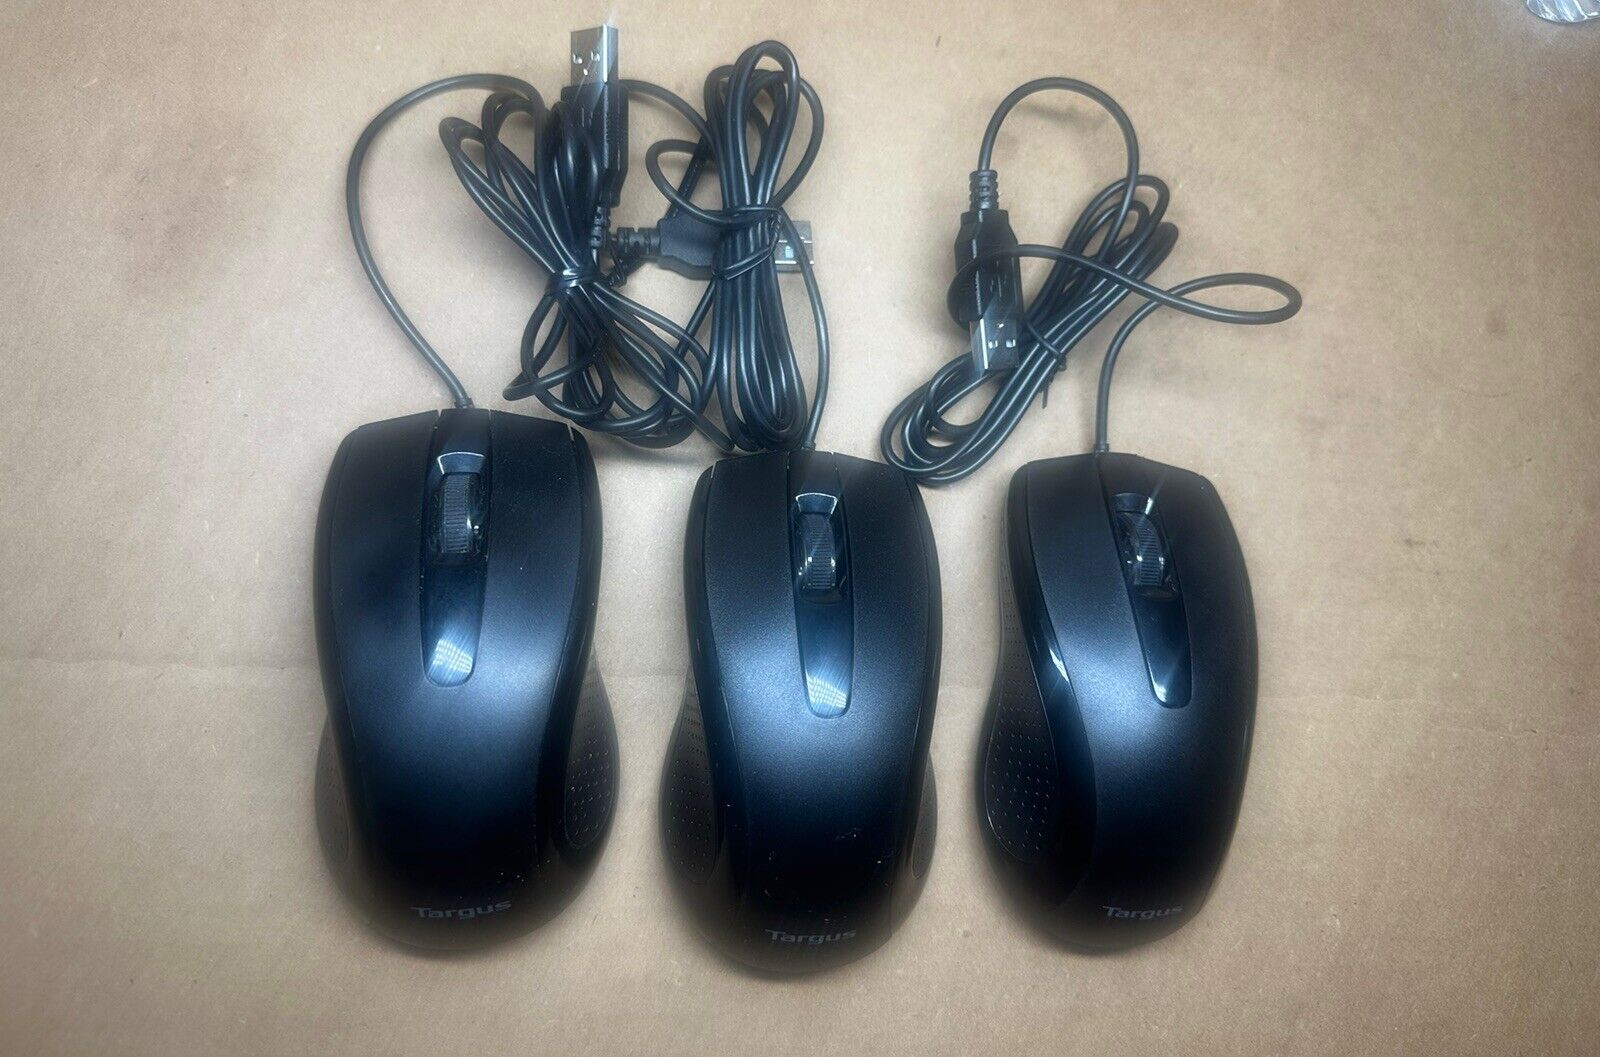 @Set of 3 Targus Optical Wired Mouse Black Model AMU660 Brand New Open Box Nice@